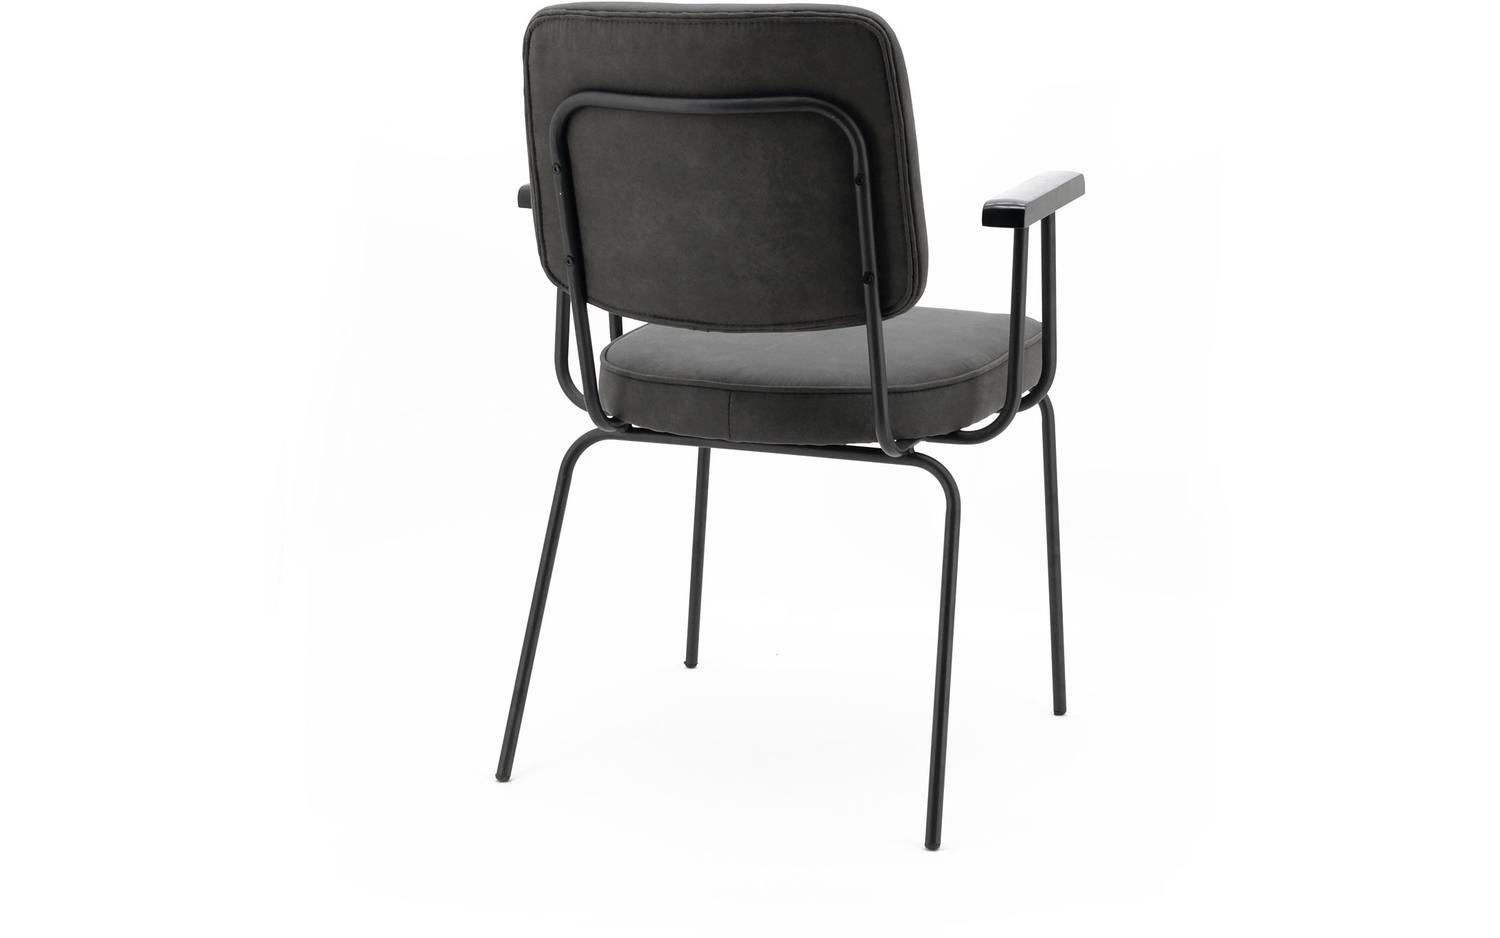 Rent a Dining chair Sonny anthracite? Rent at KeyPro furniture rental!